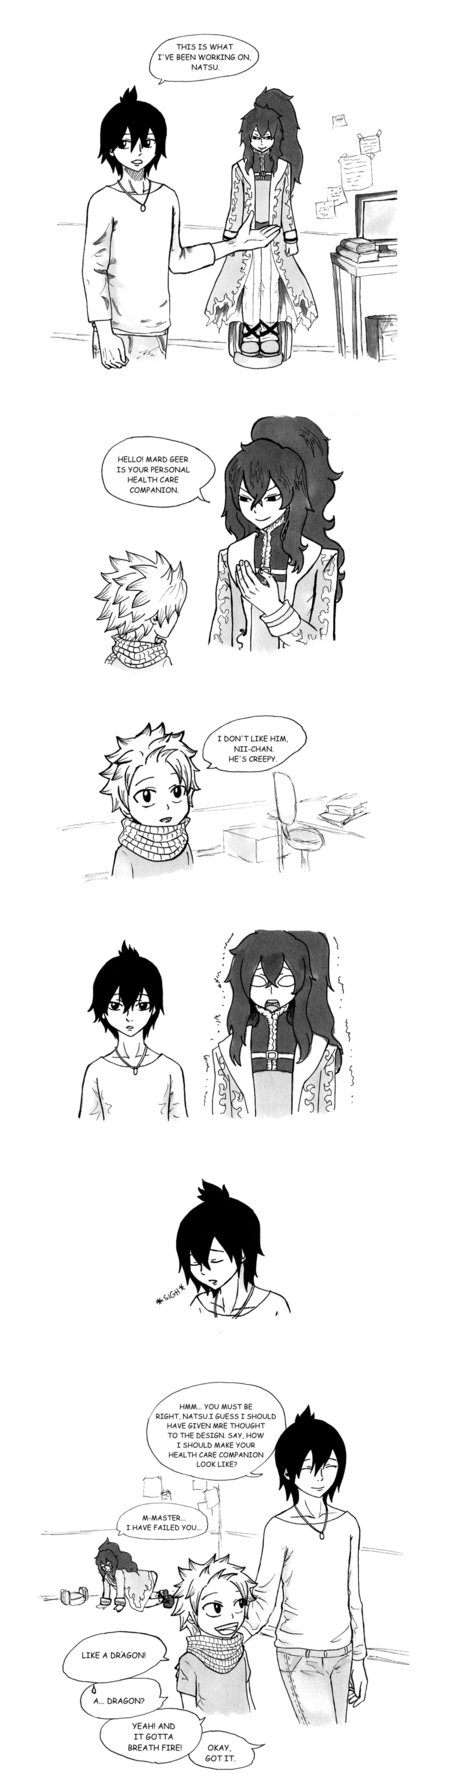 brothers comic fairy_tail monochrome natsu_dragneel parody siblings zeref